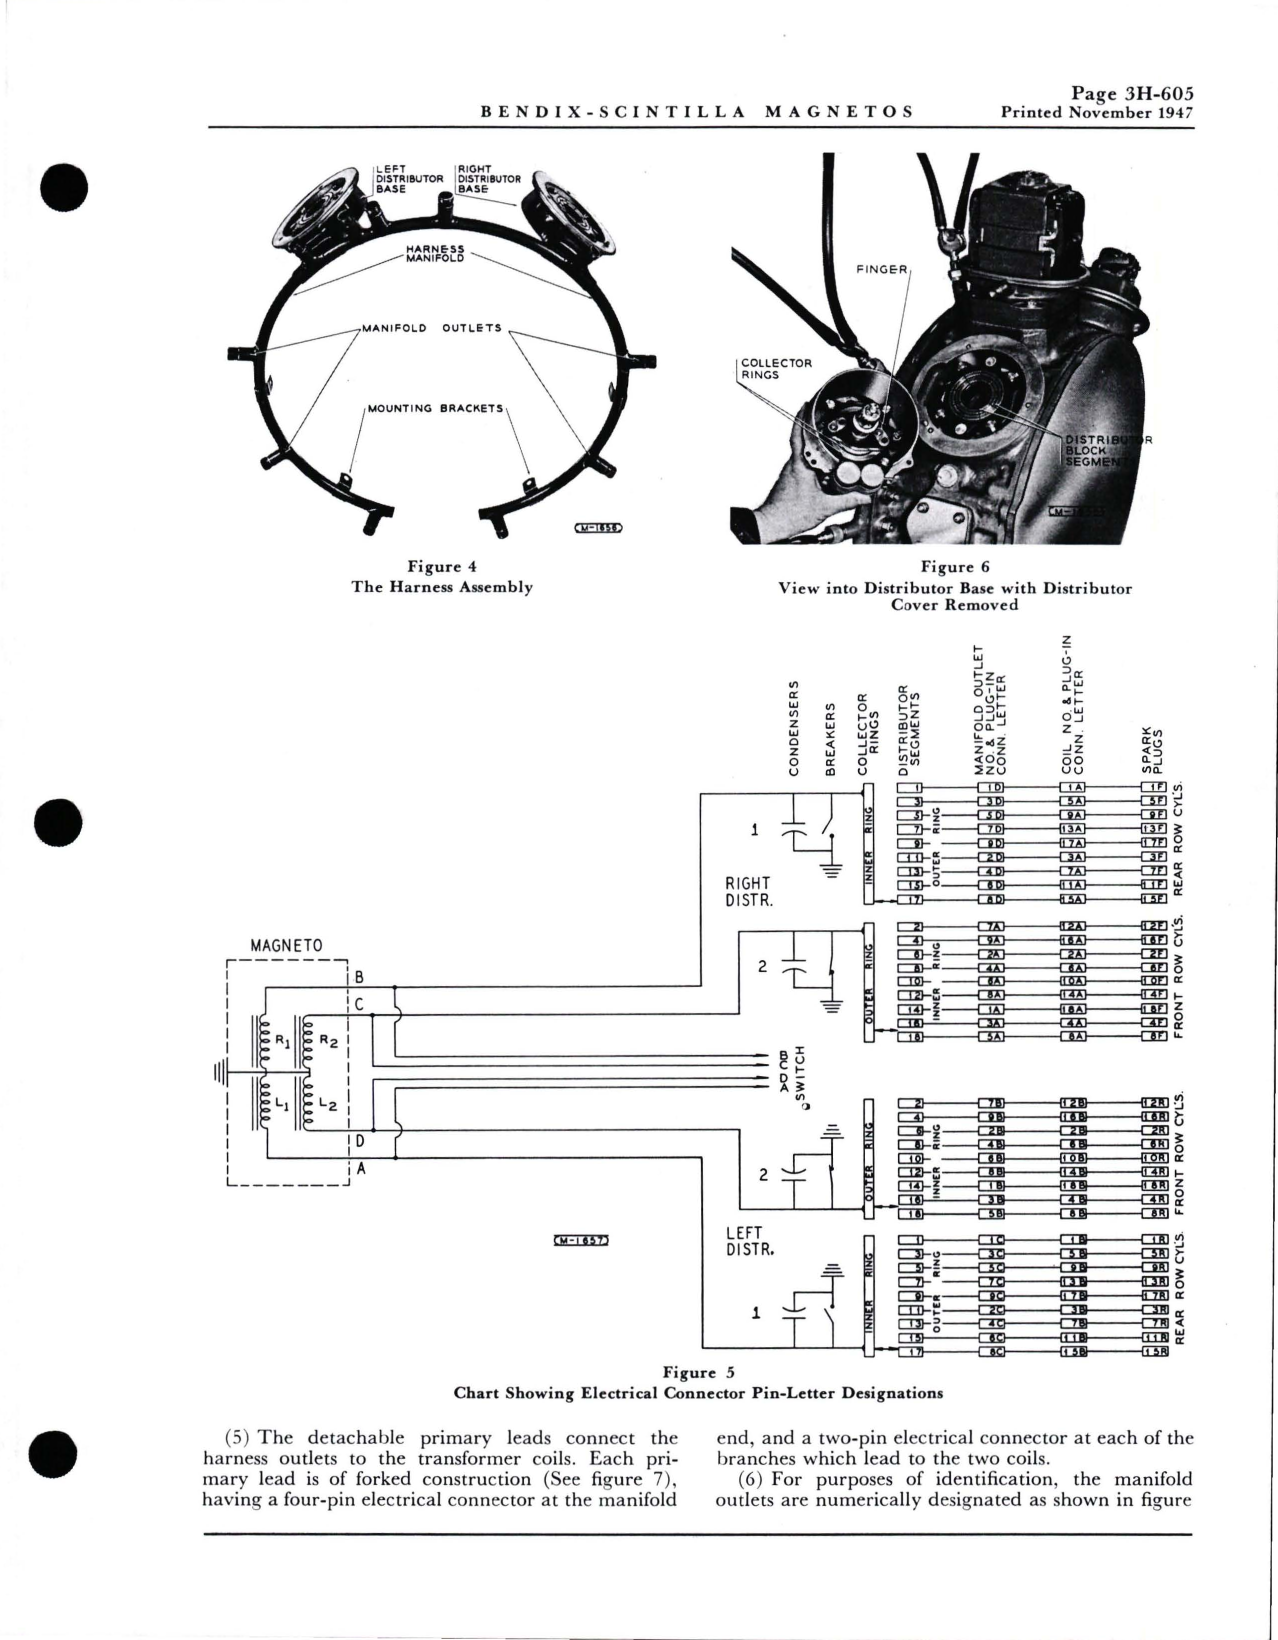 Sample page 5 from AirCorps Library document: Service Instructions for Bendix Scintilla Low Tension - High Altitude Ignition System used on Pratt & Whitney R-2800-C Engines